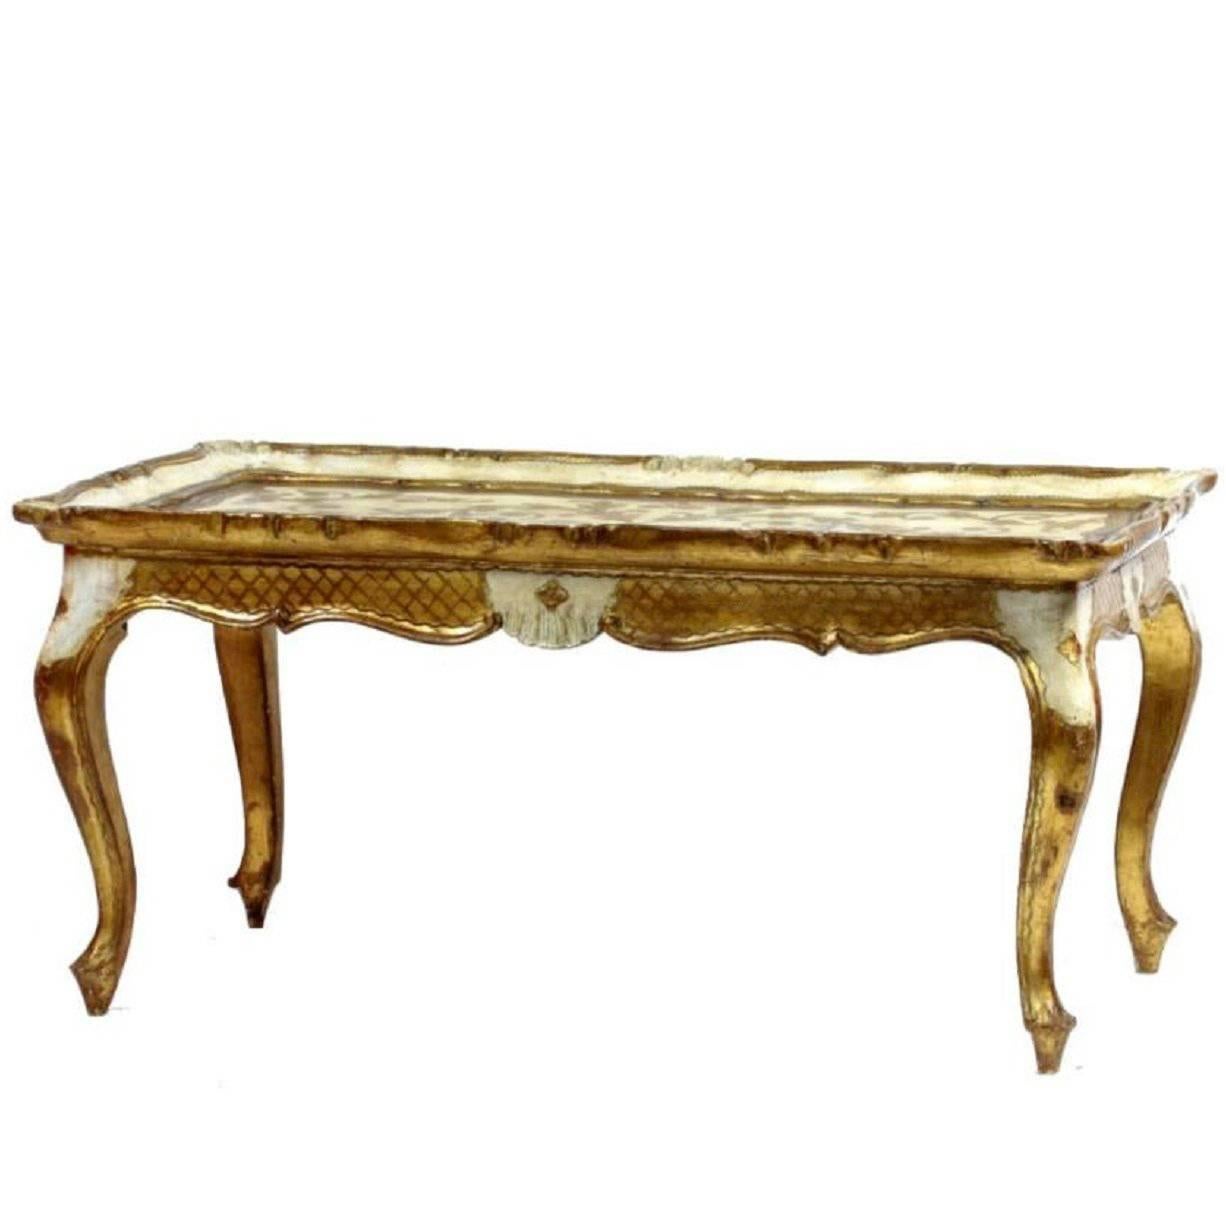 19th Century Venetian Rococo Hand-Painted and Giltwood Table